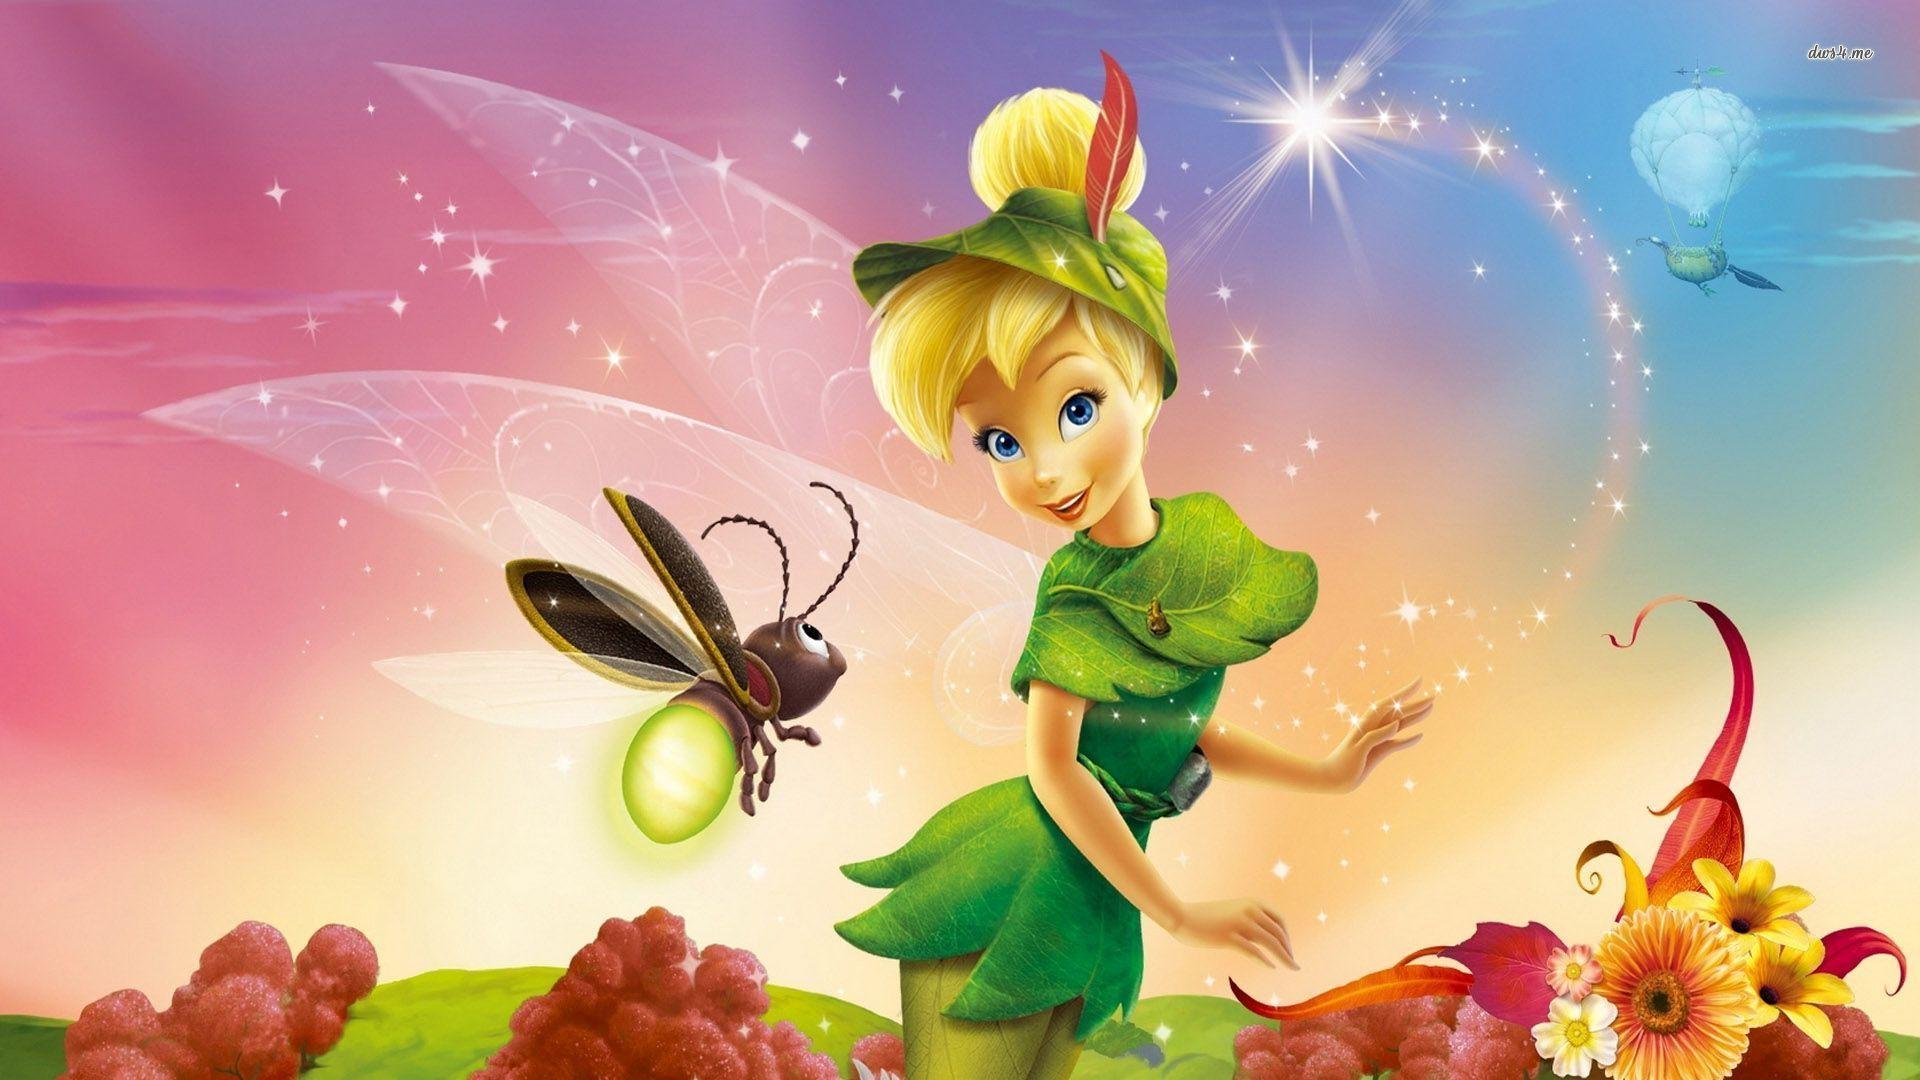 Widescreen Tinkerbell Movie Cave On Beautiful Picture Of Tinker